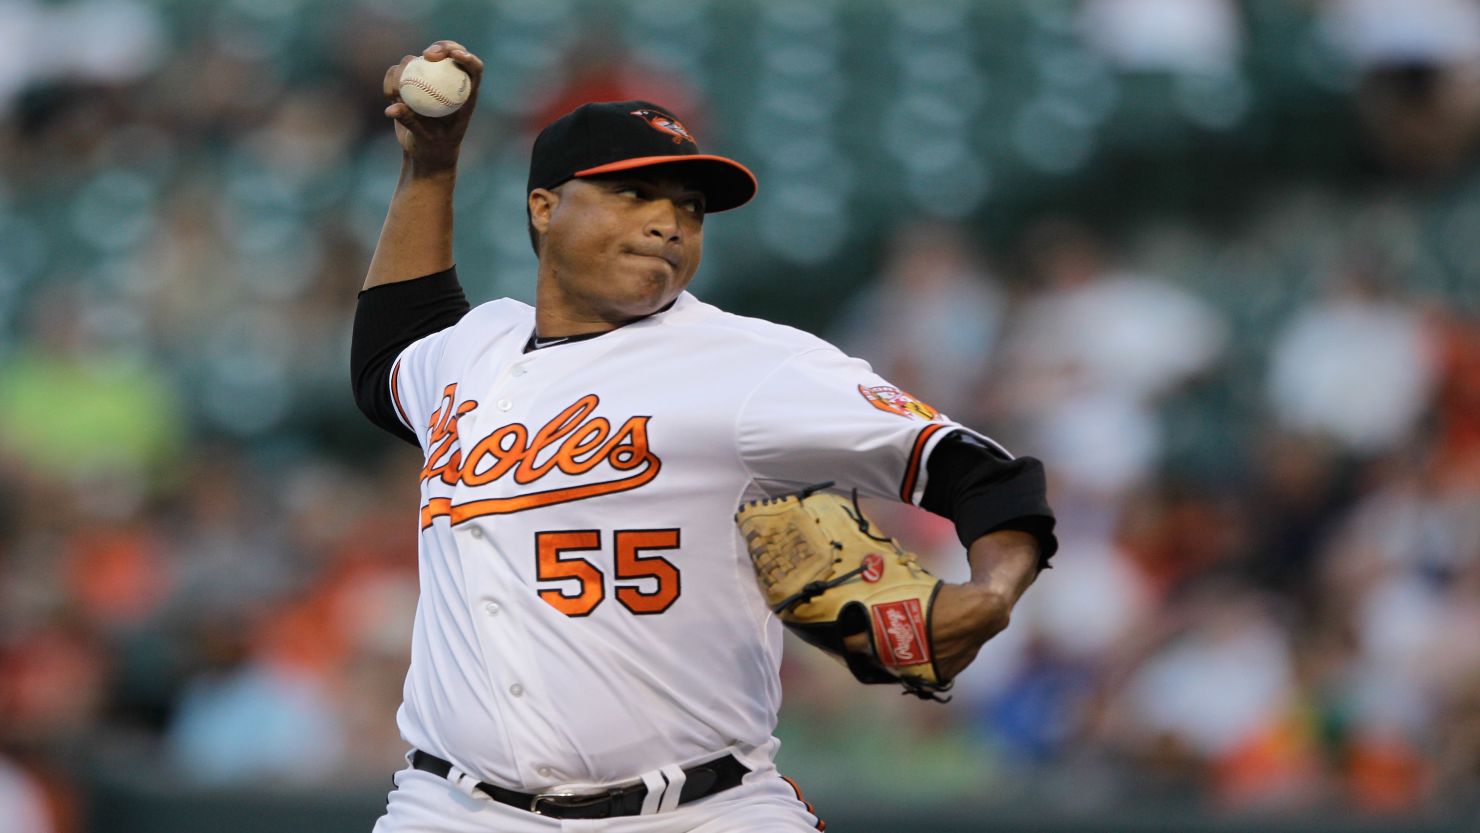 Starting pitcher Alfredo Simon #55 of the Baltimore Orioles as pictured at Oriole Park on July 16 in Baltimore, Maryland.